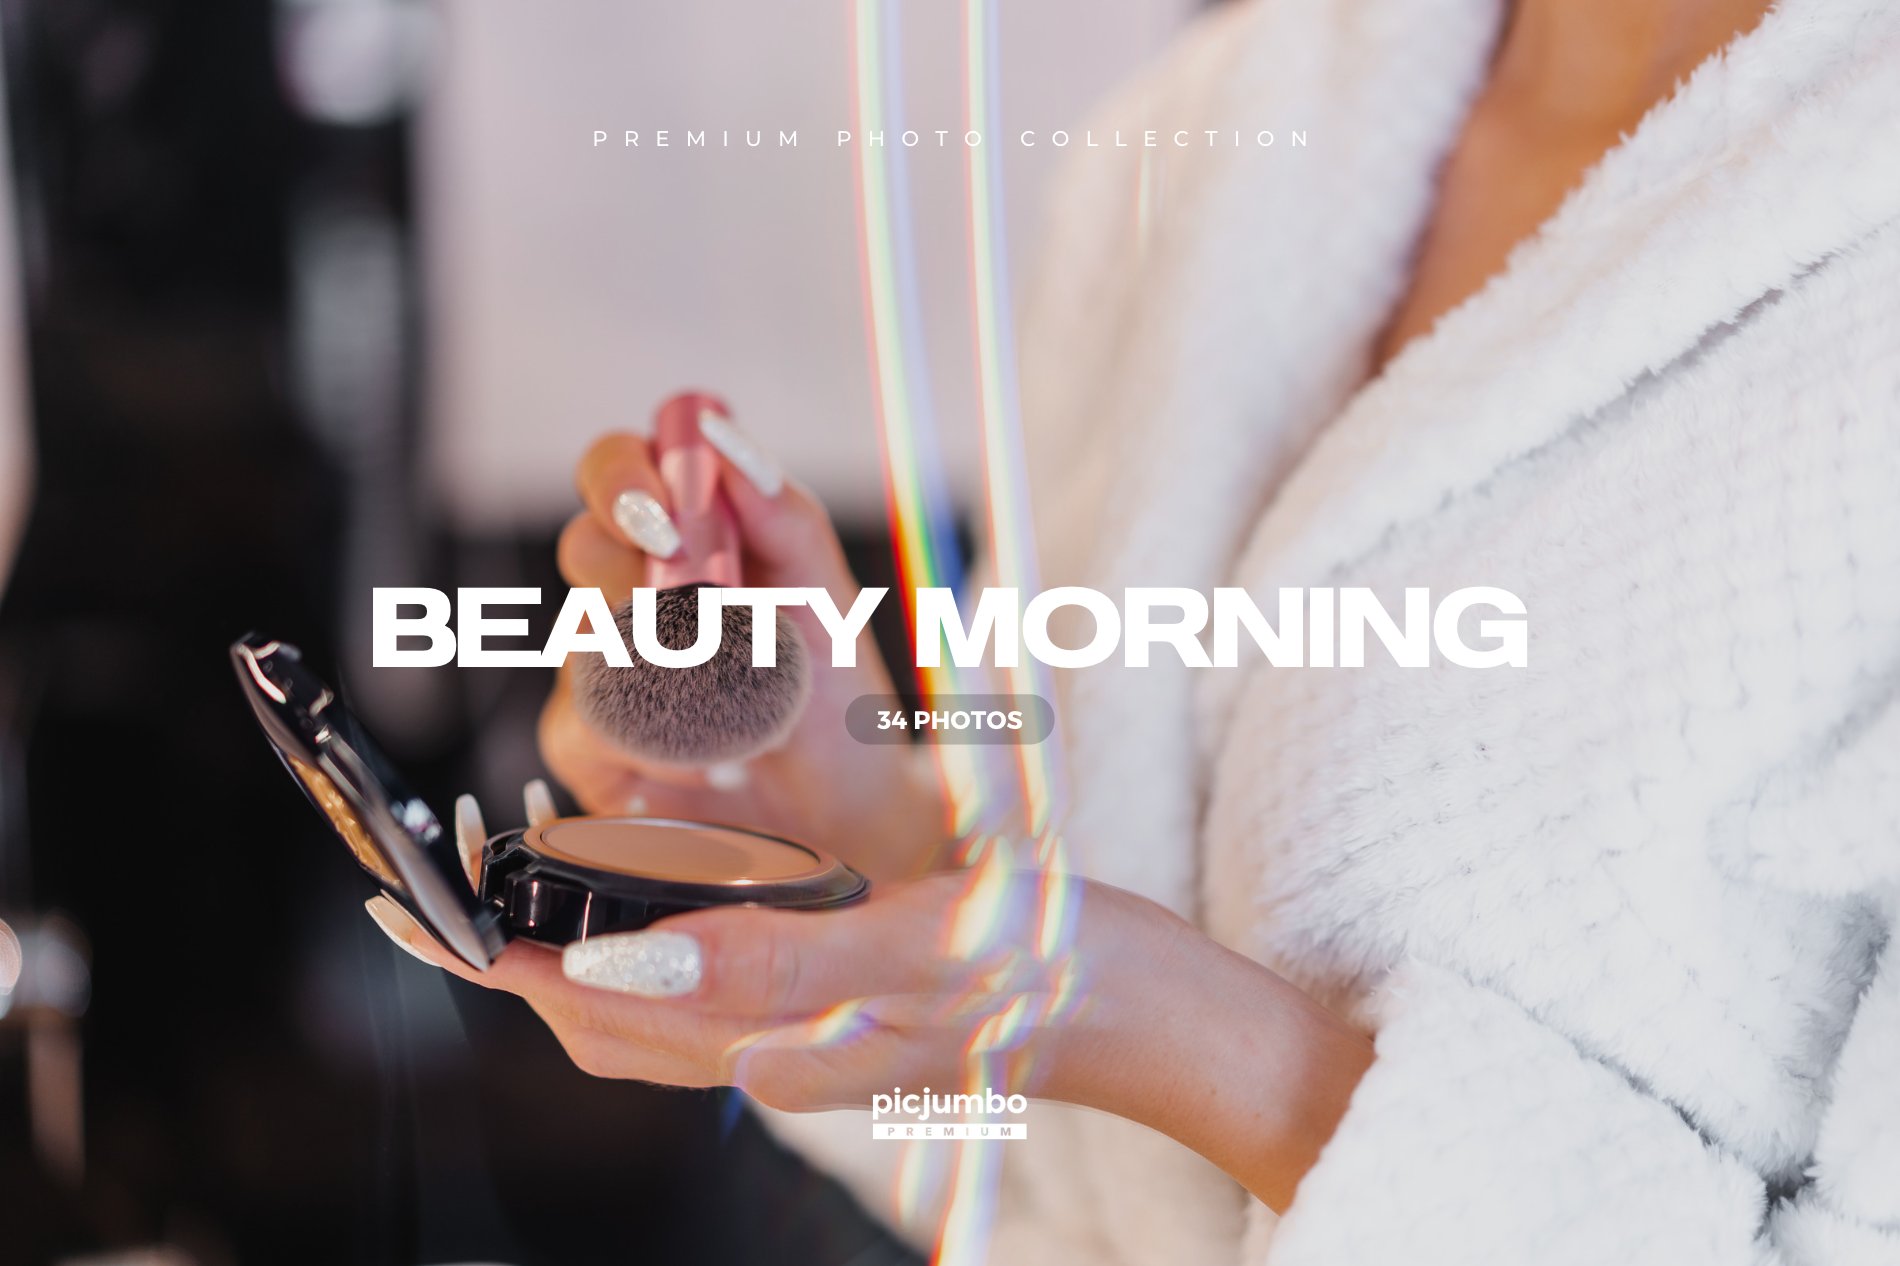 Download hi-res stock photos from our Beauty Morning PREMIUM Collection!